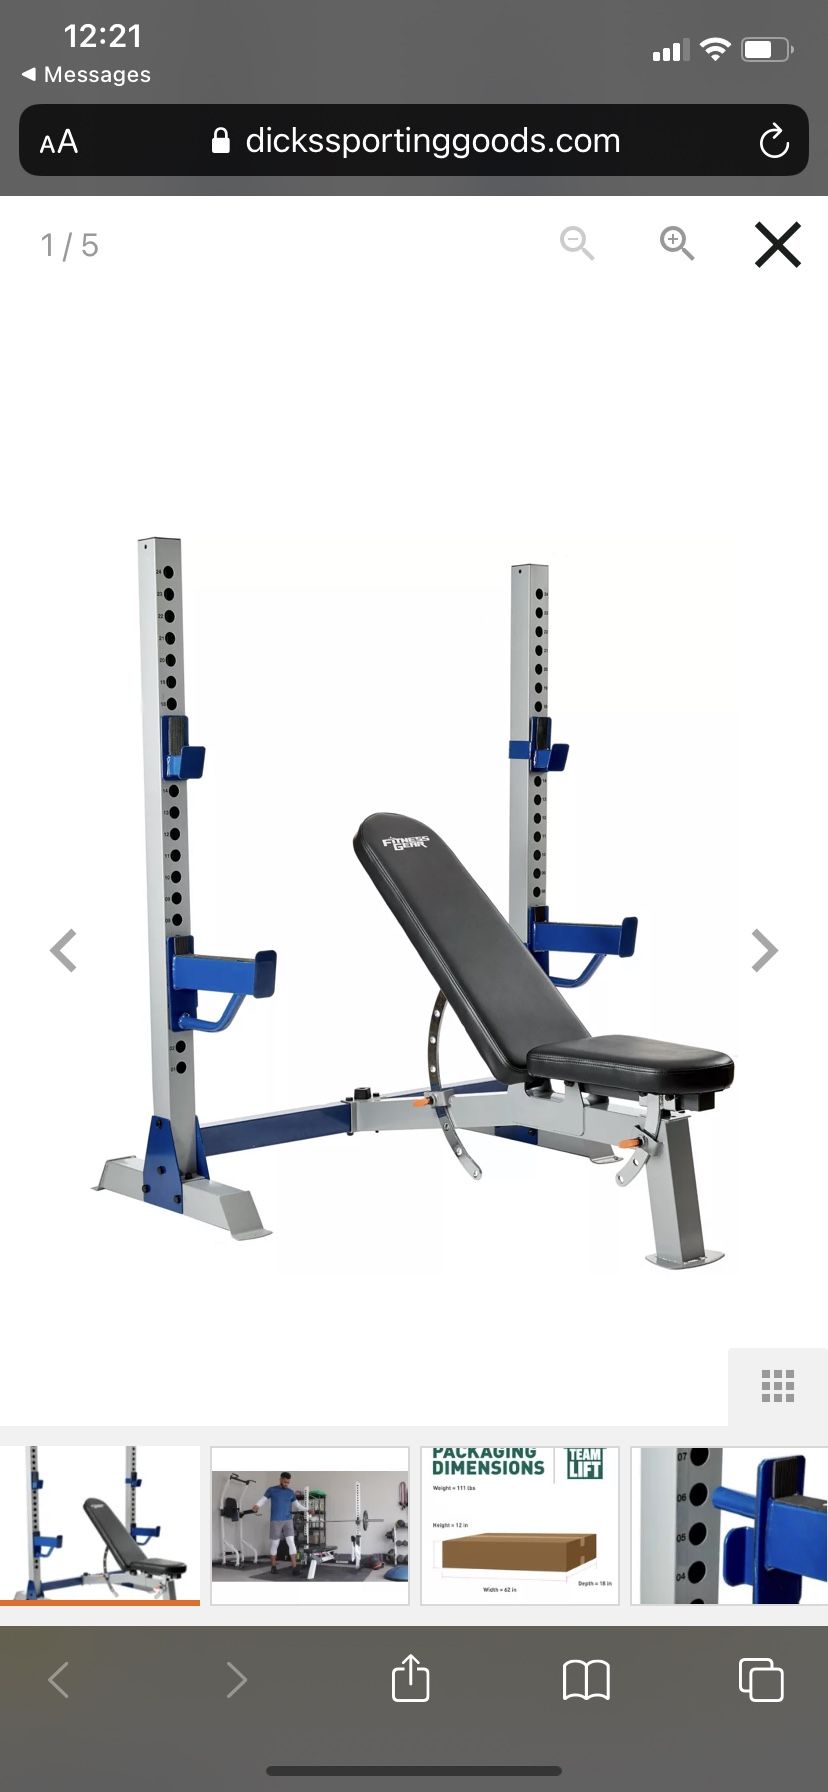 Fitness Gear Pro Olympic Weight Bench